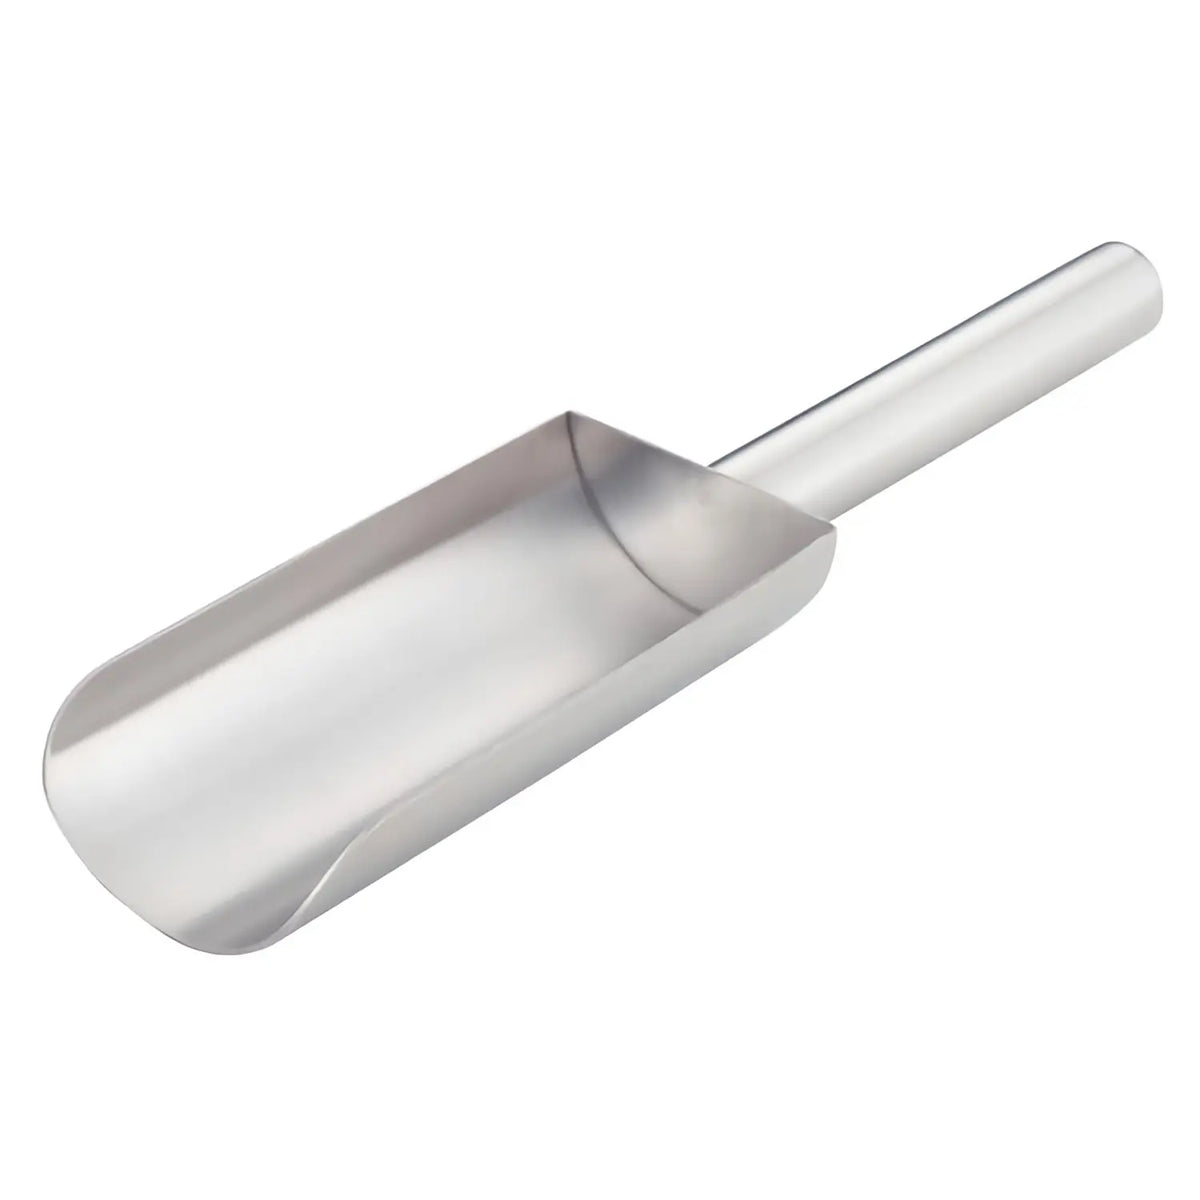 Sampo Sangyo Stainless Steel Ice Scoop